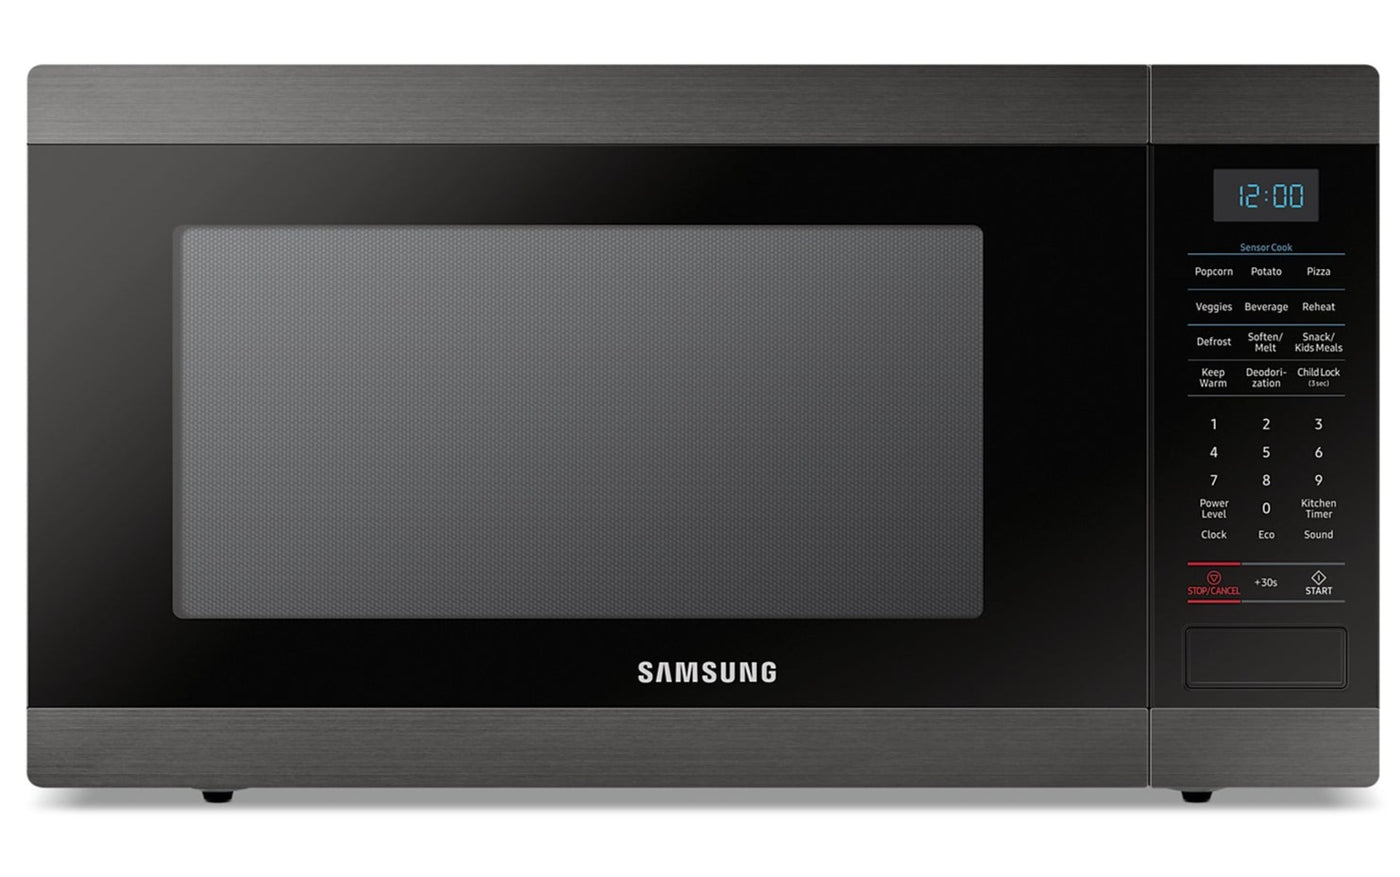 Samsung Countertop Microwave With Ceramic Interior Ms19m8020tg